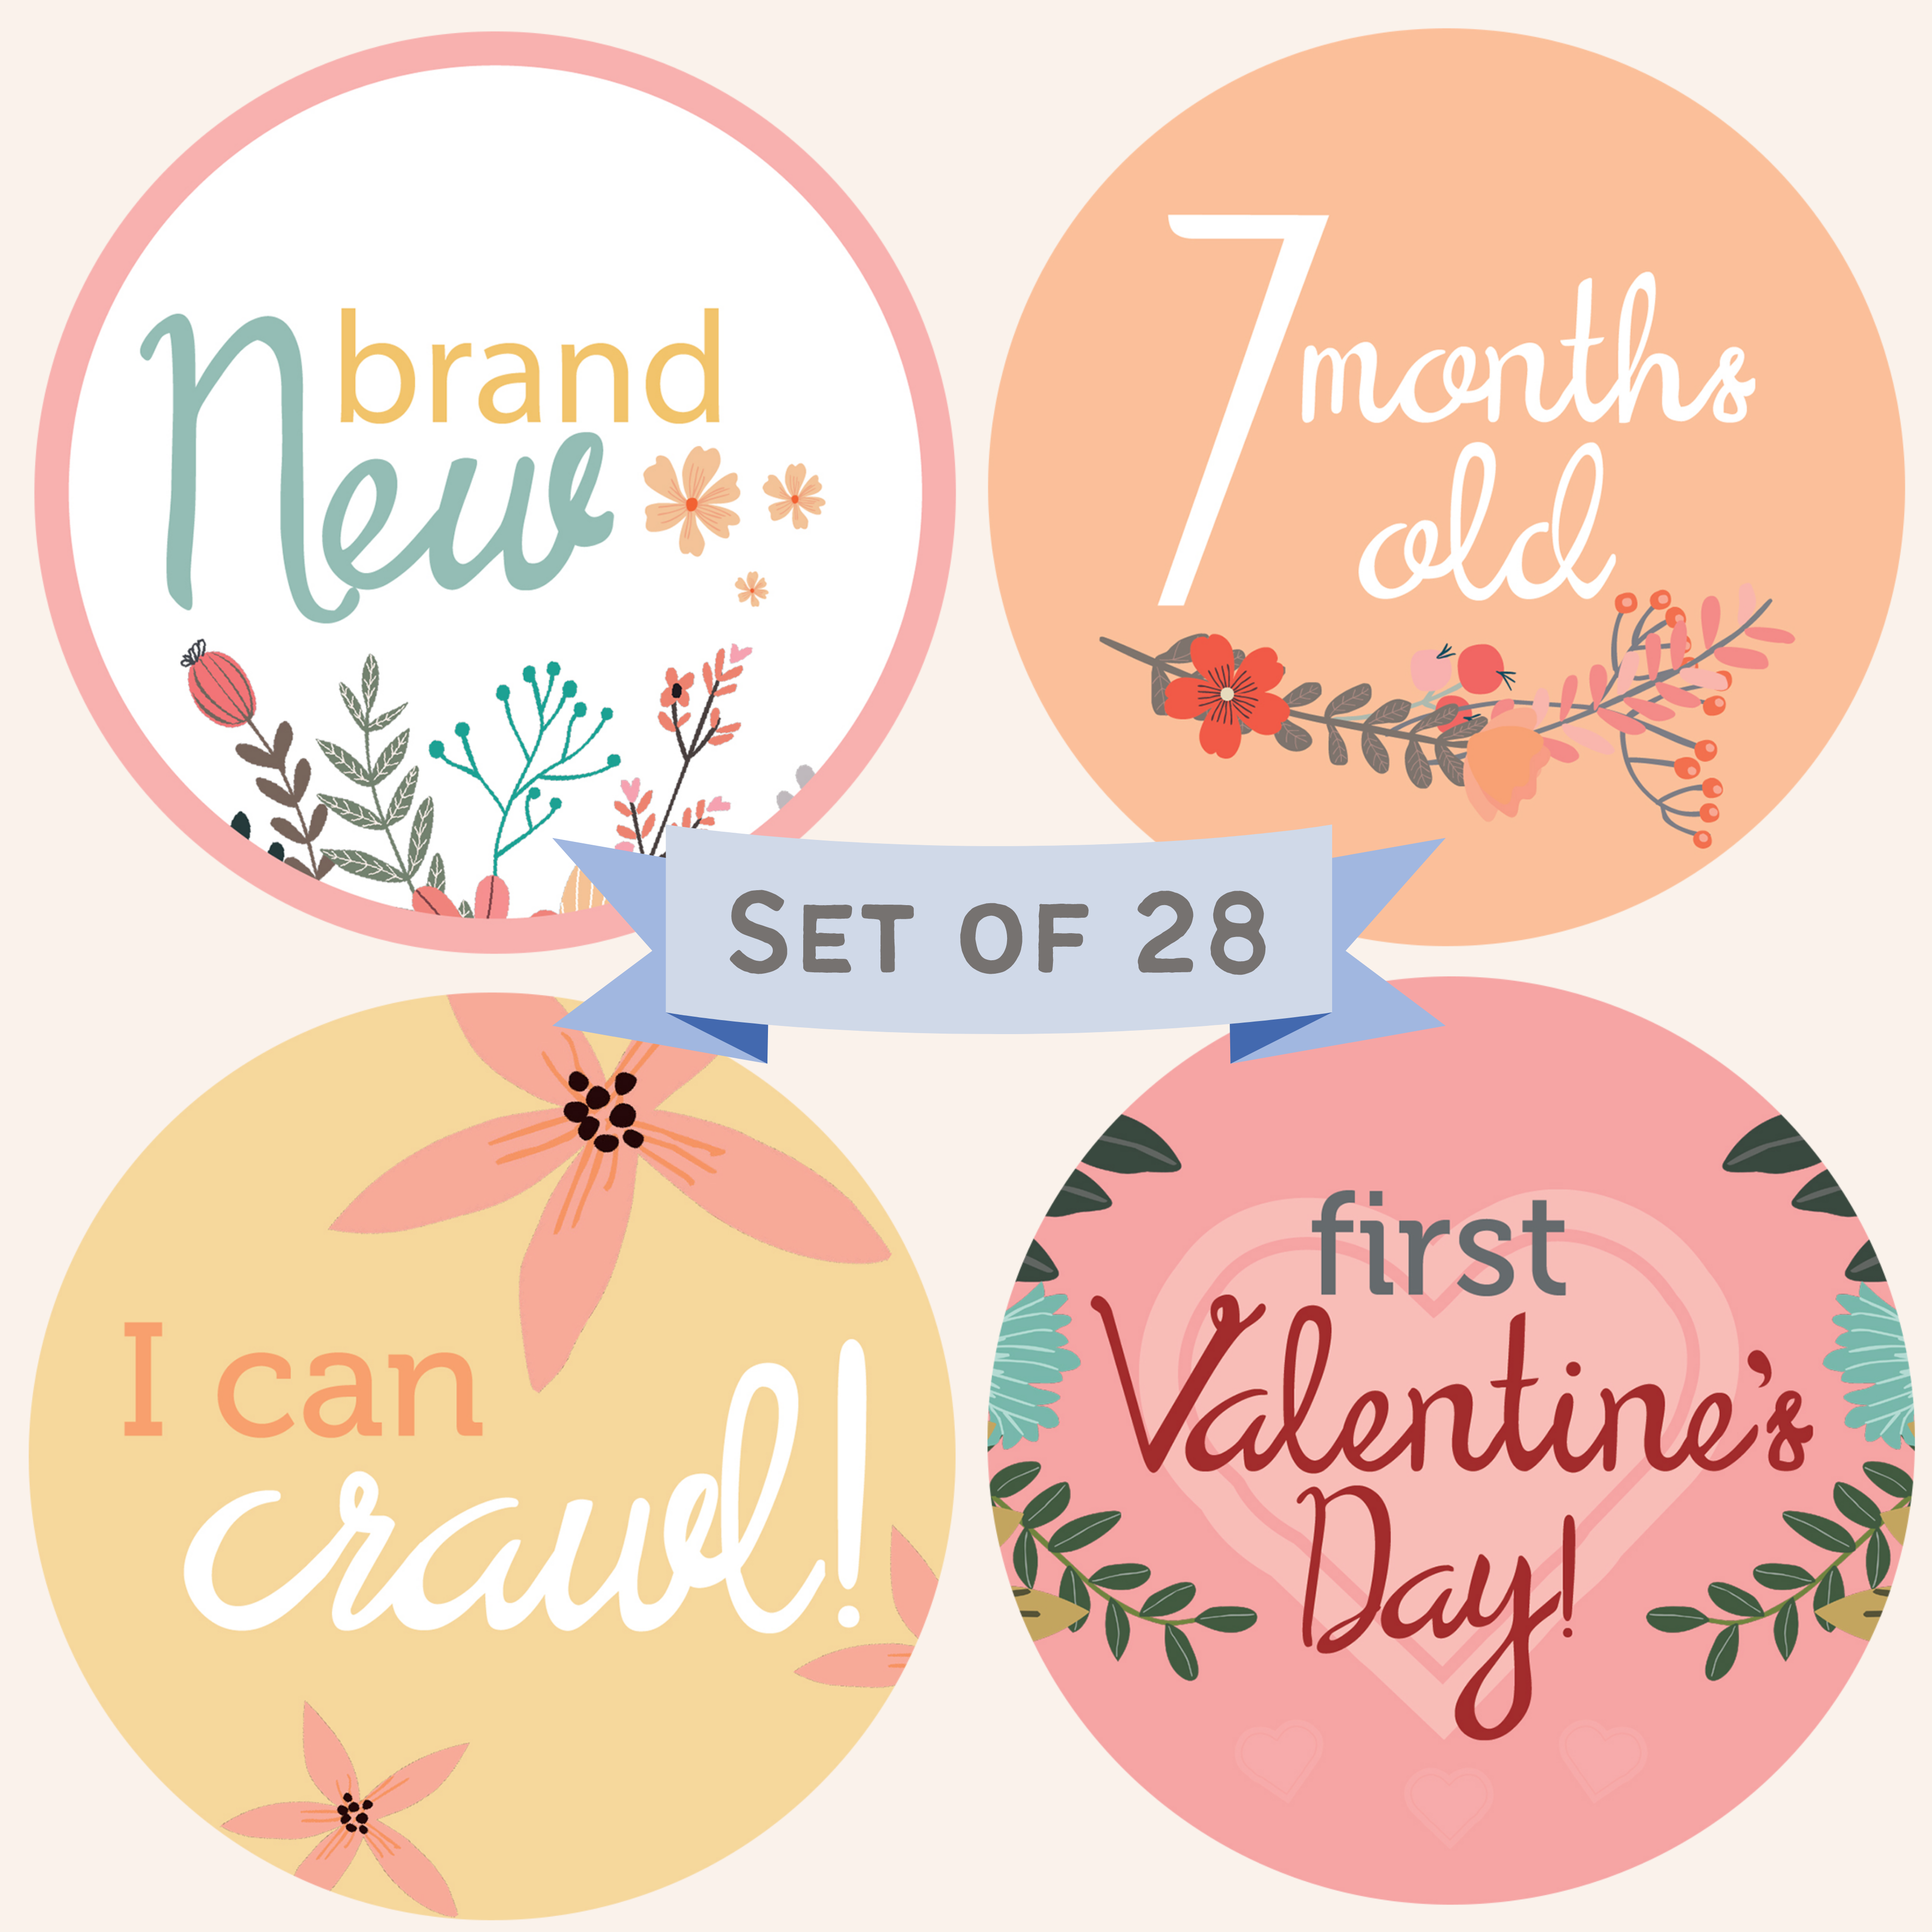 Floral Baby Month Stickers – INKtropolis